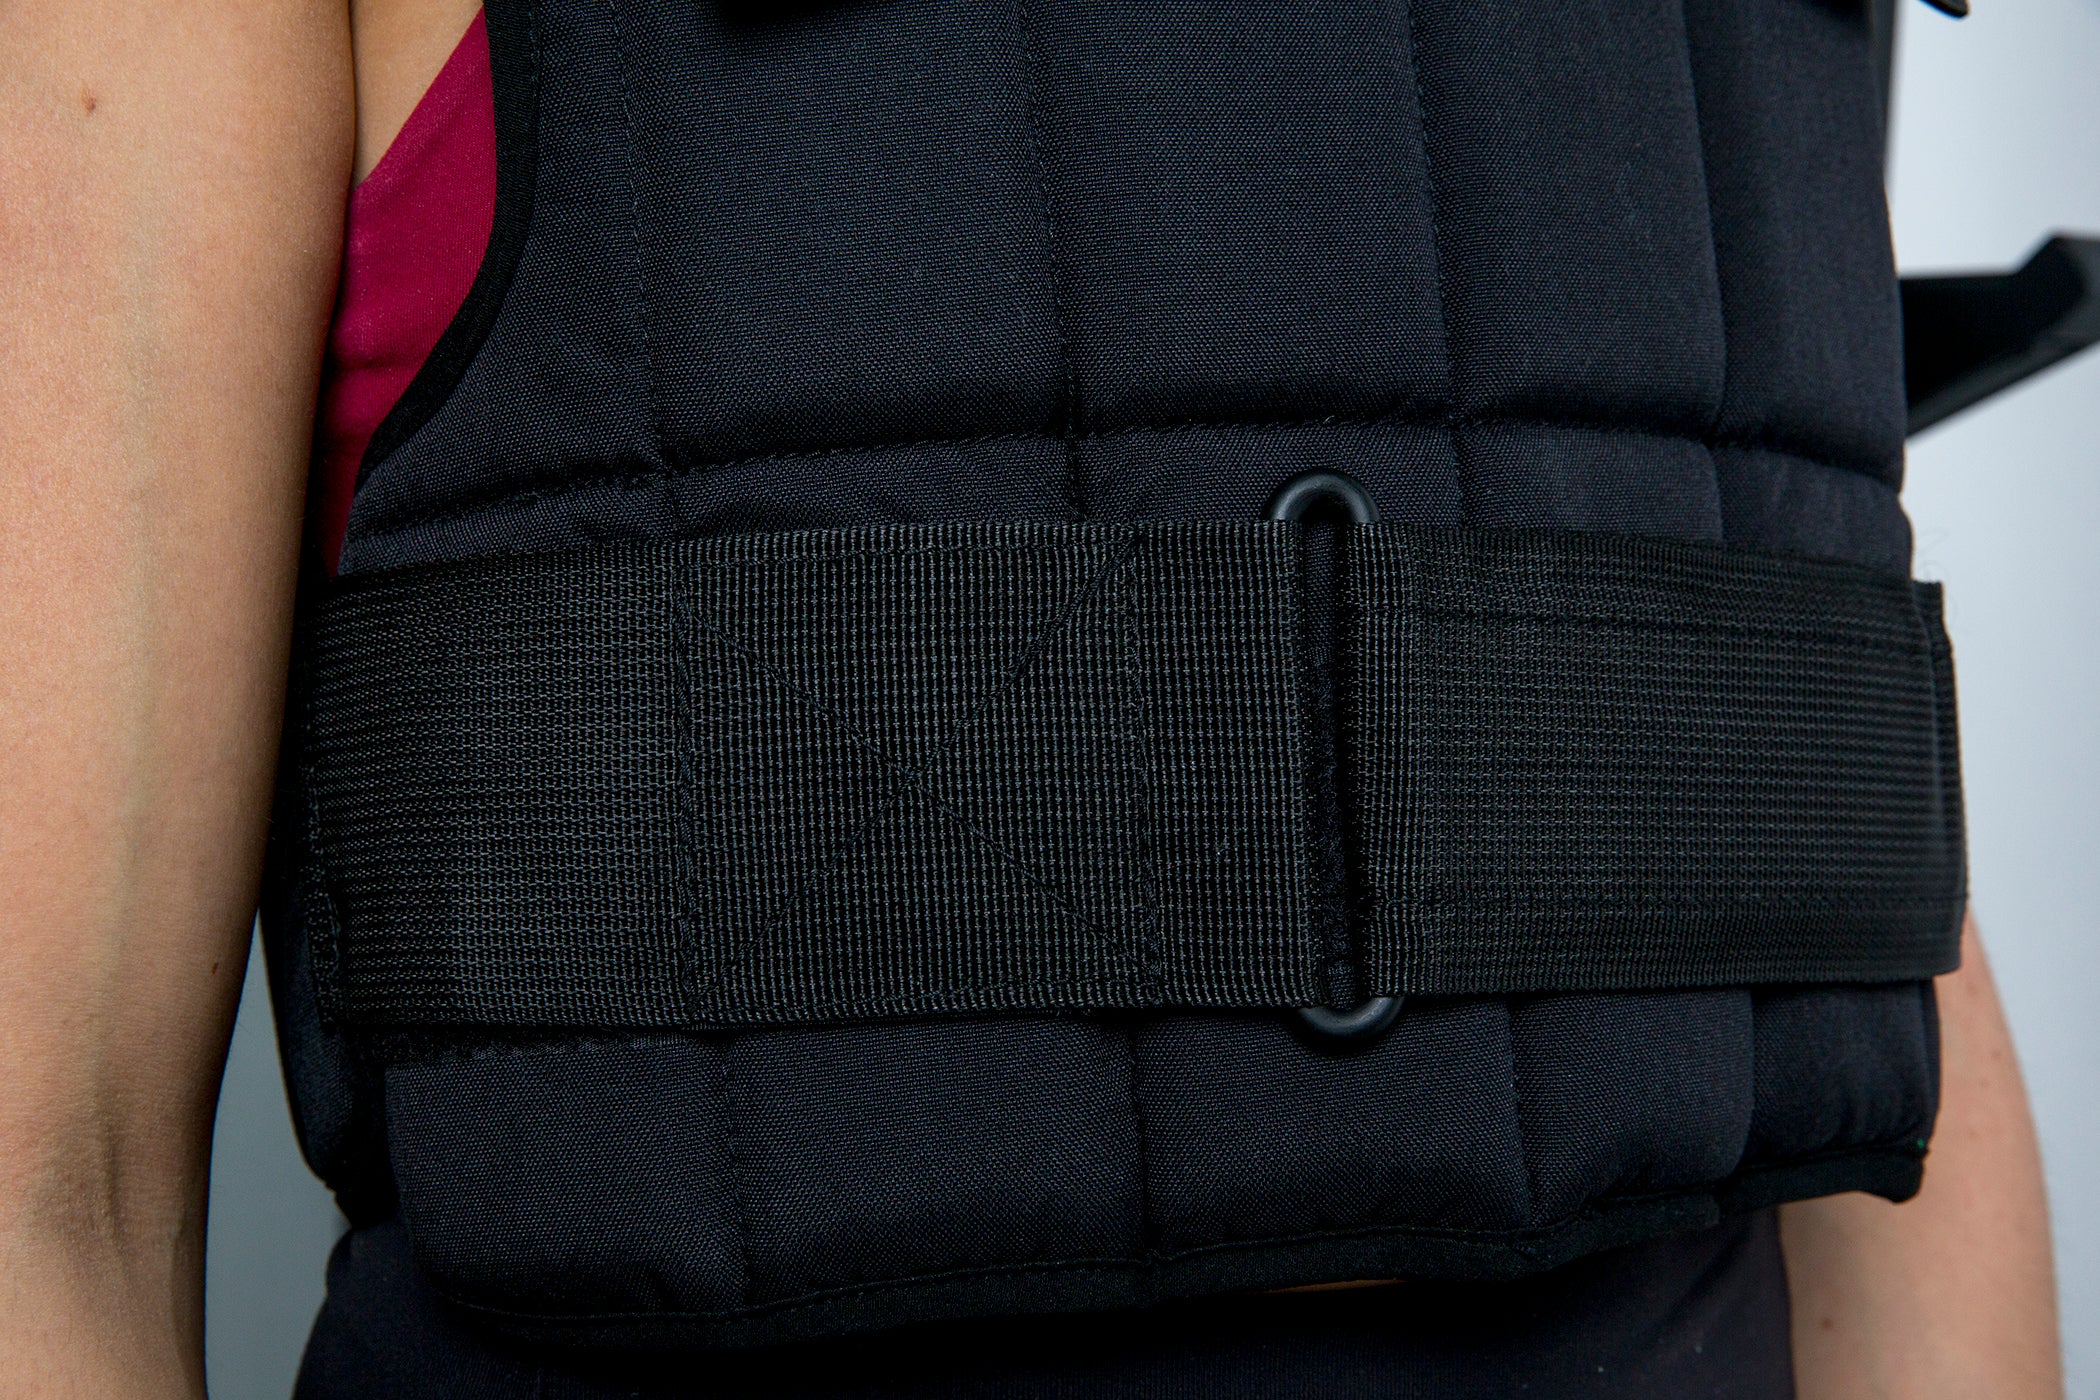 36 Lb. Adjustable Weighted Vest